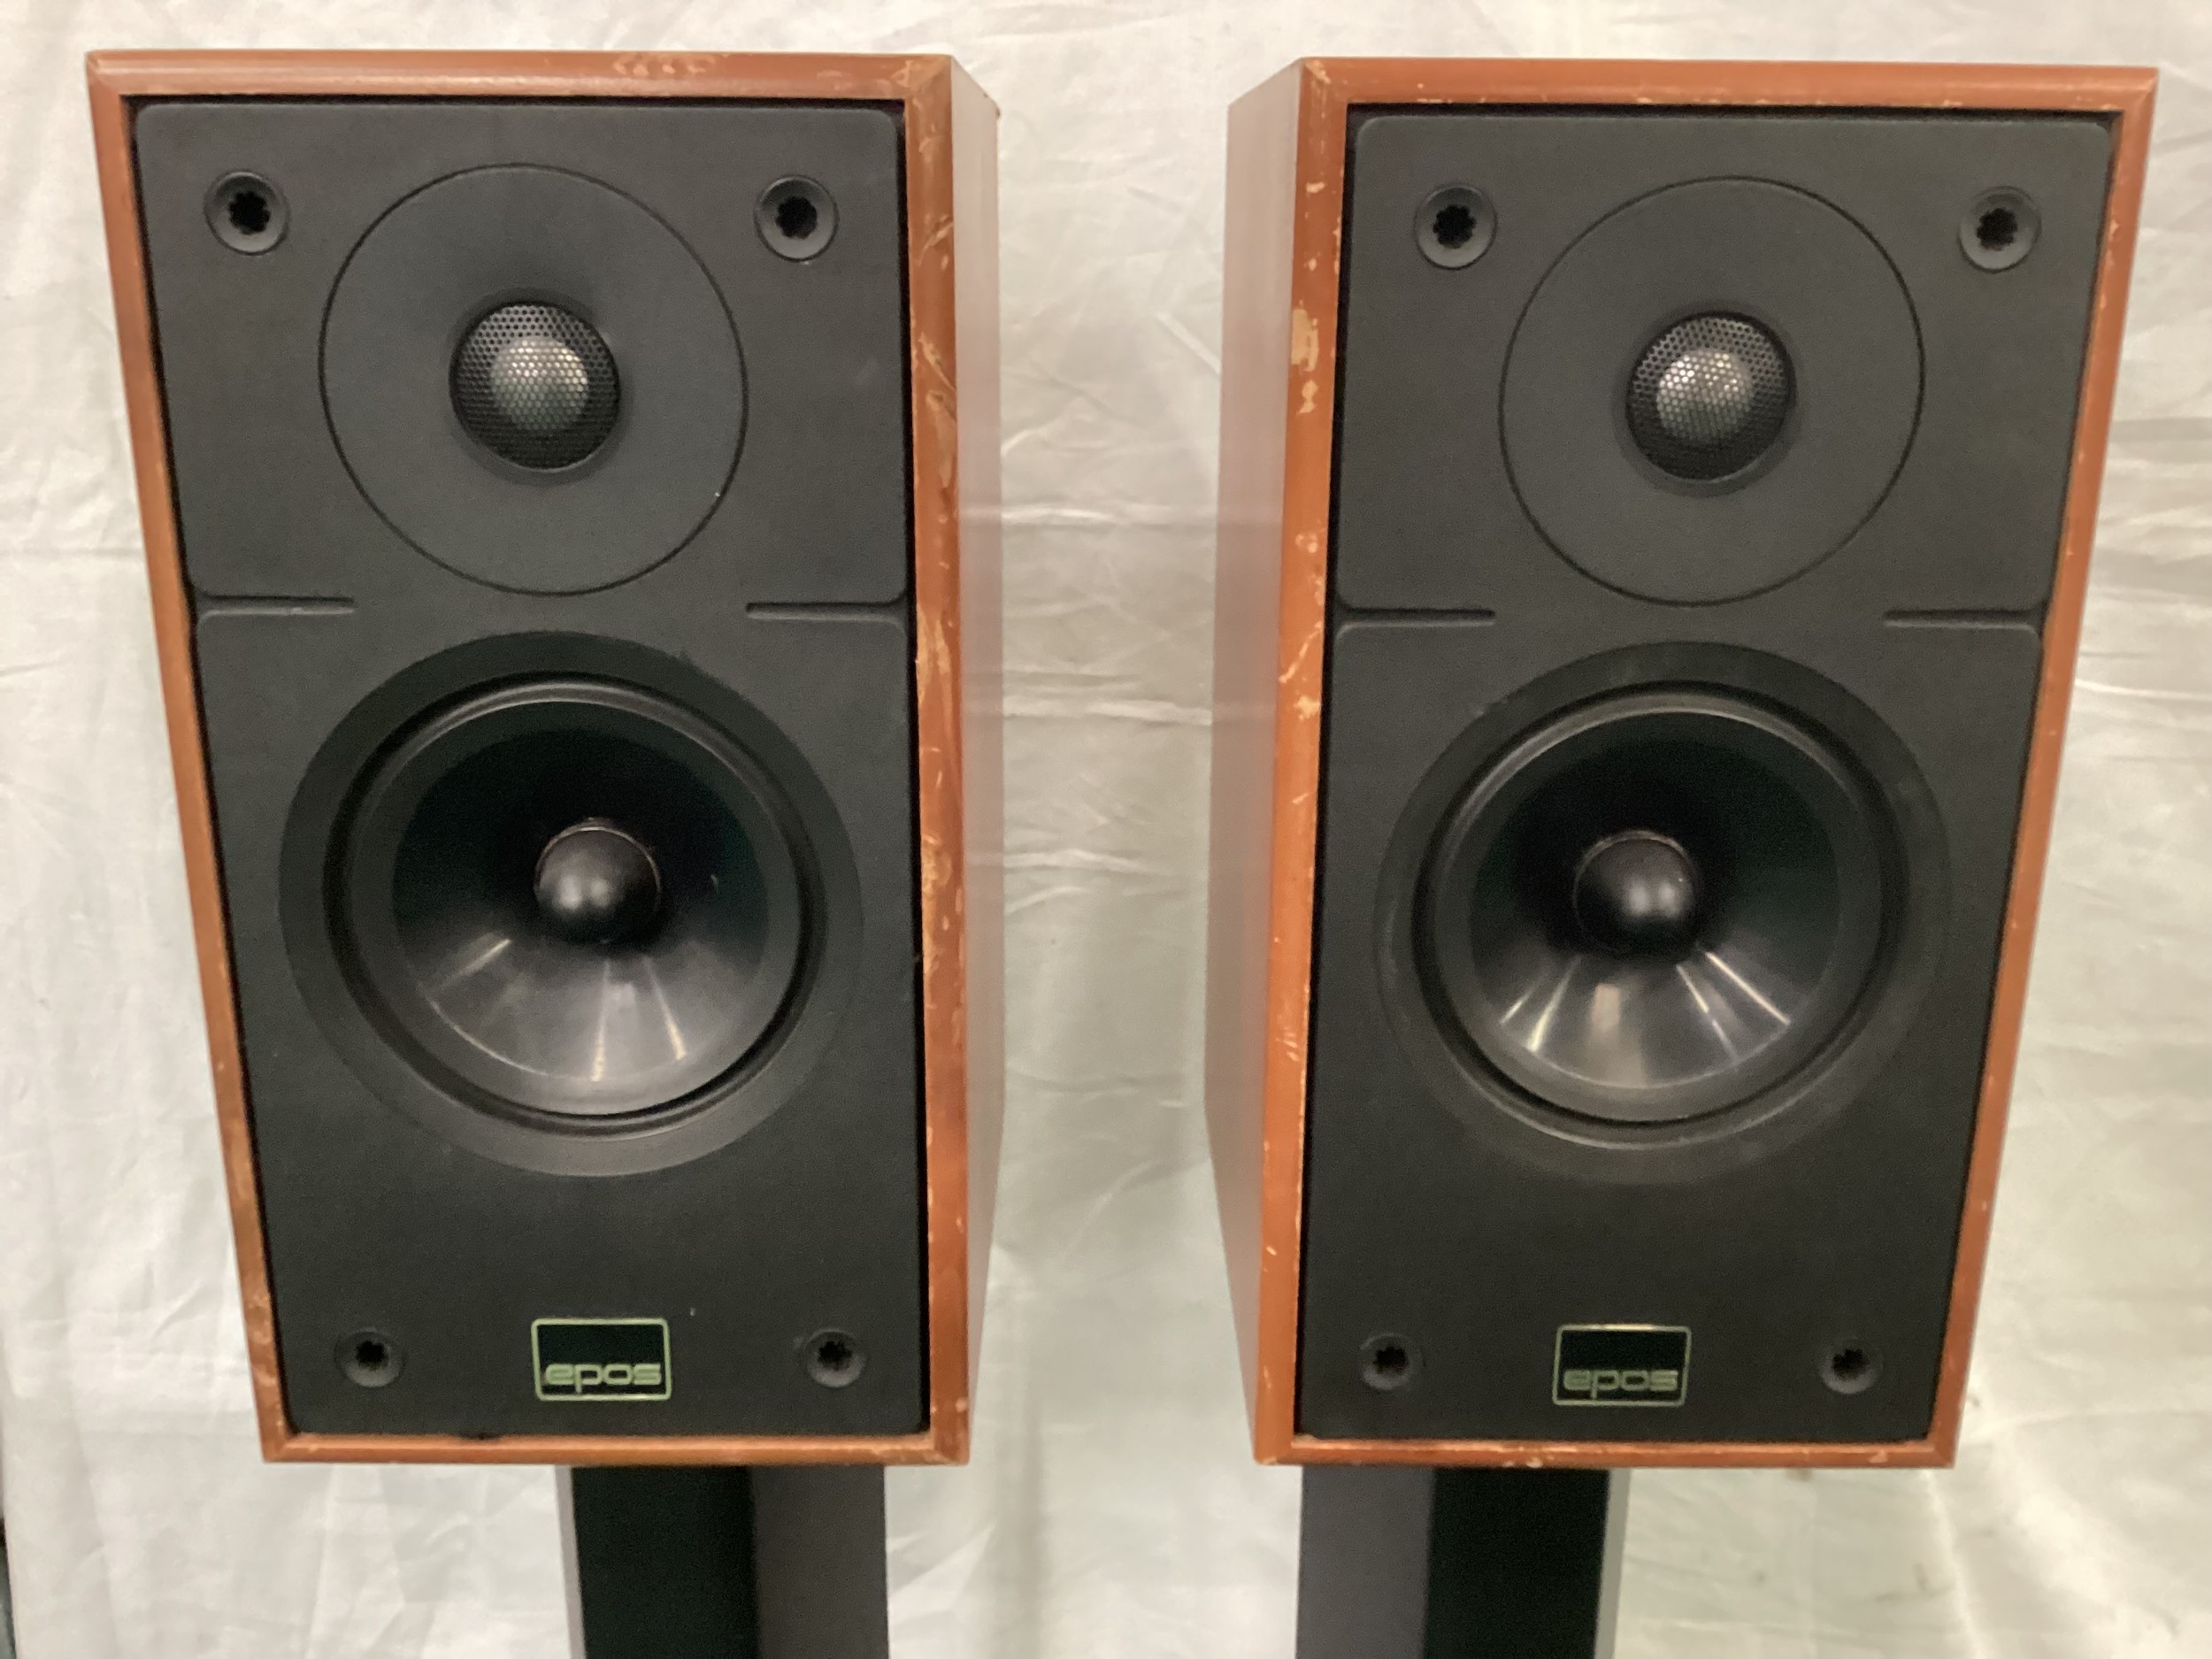 NICE PAIR OF EPOS ACOUSTICS SPEAKERS COMPLETE WITH METAL STANDS. - Image 2 of 7